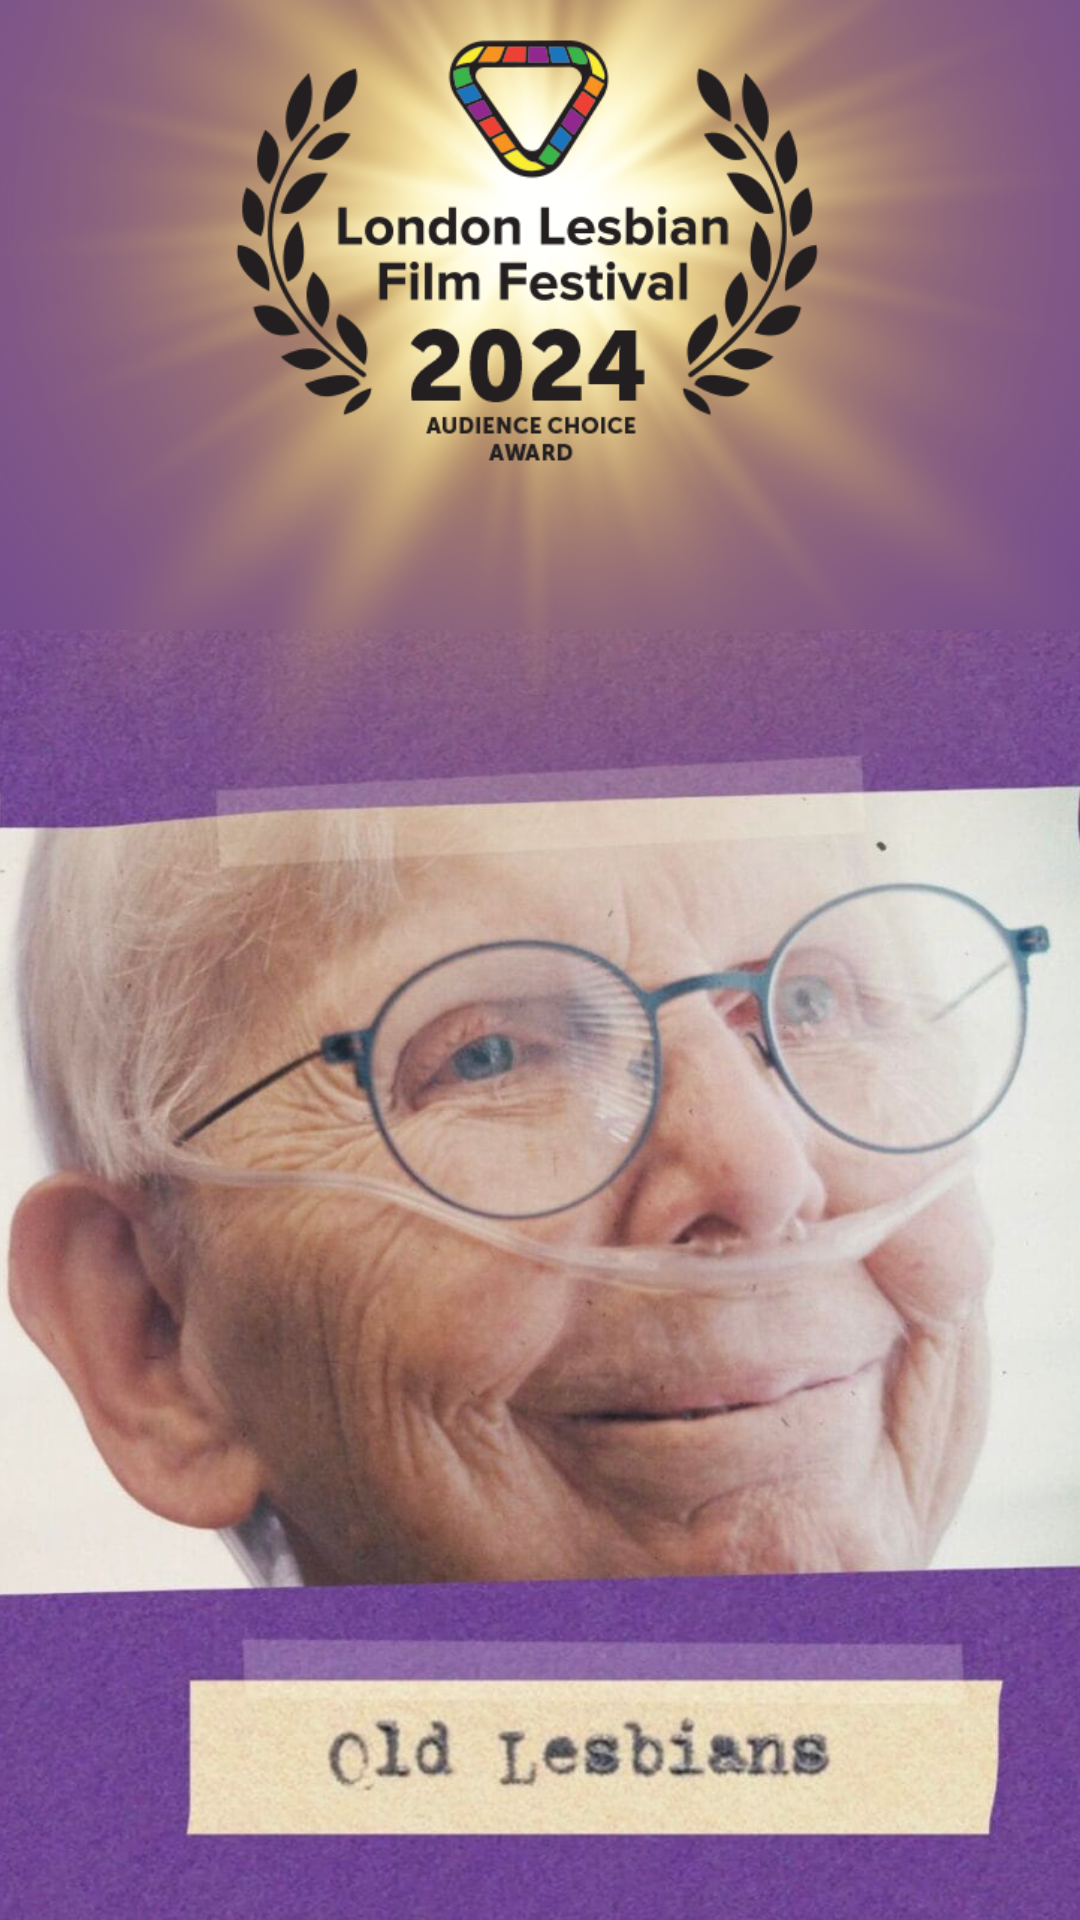 An image of the movie poster for Old Lesbians. A smiling older woman with oxygen tube running to her nose.